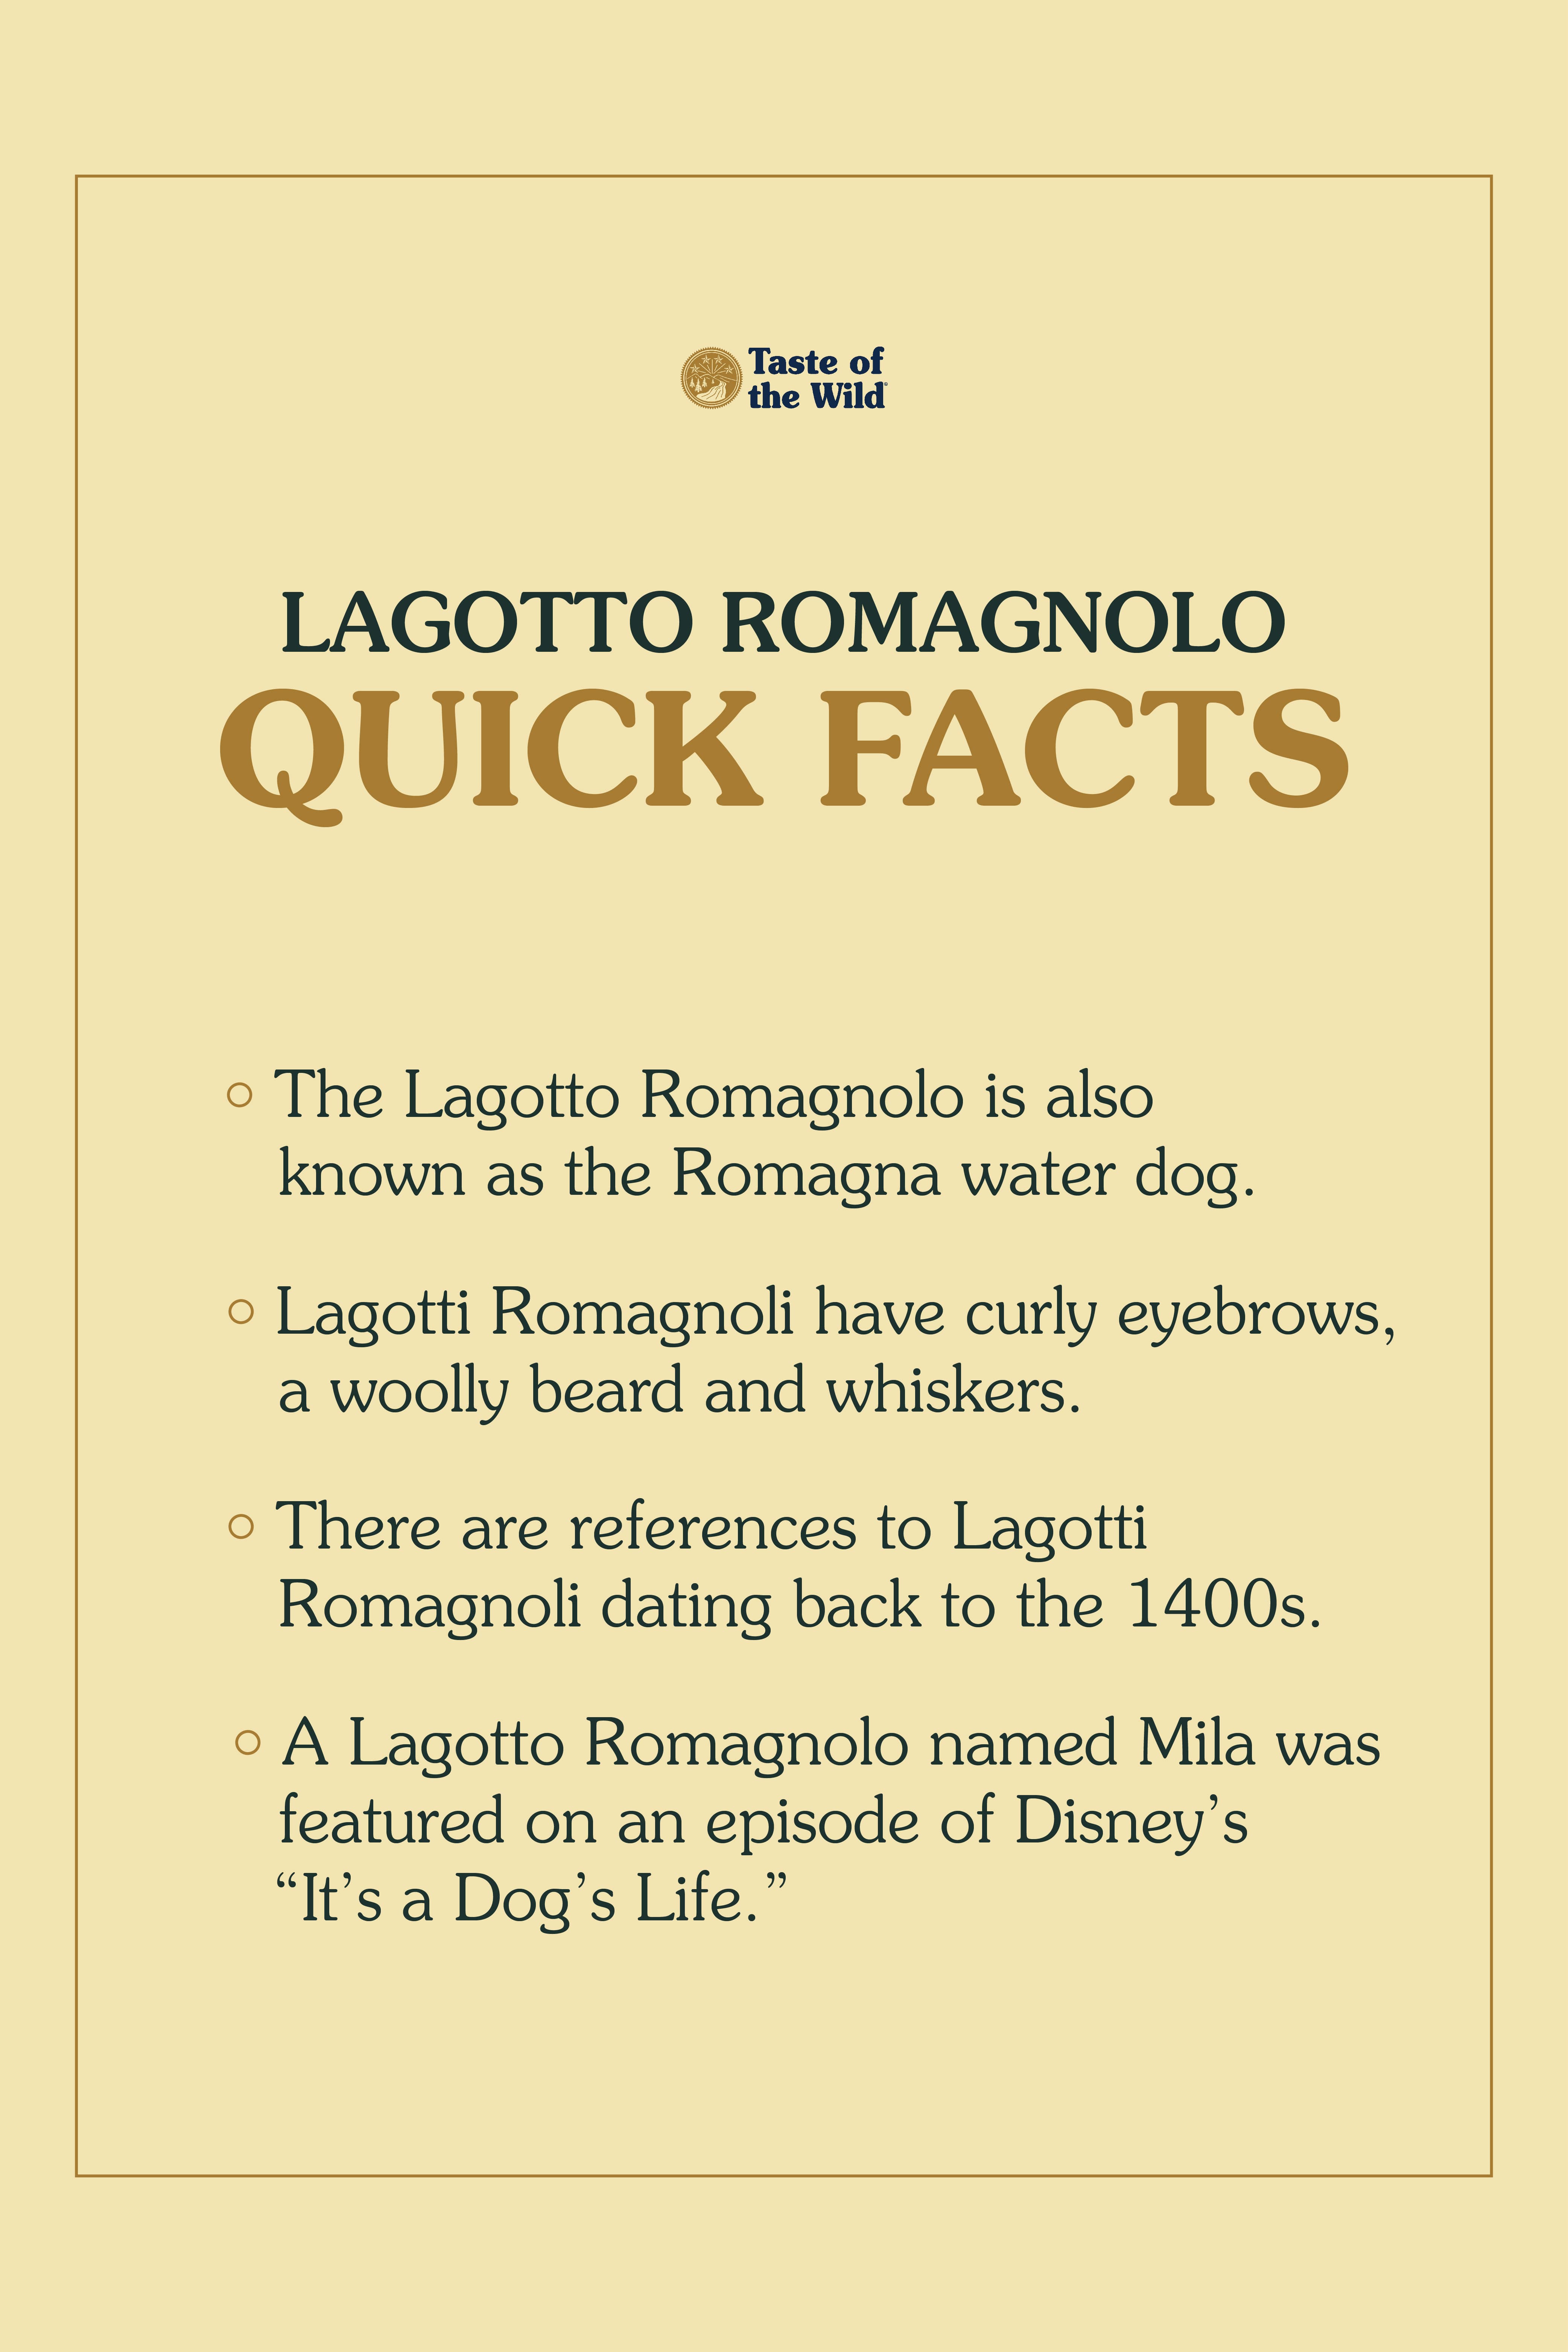 An interior graphic detailing four quick facts about the Lagotto Romagnolo breed.